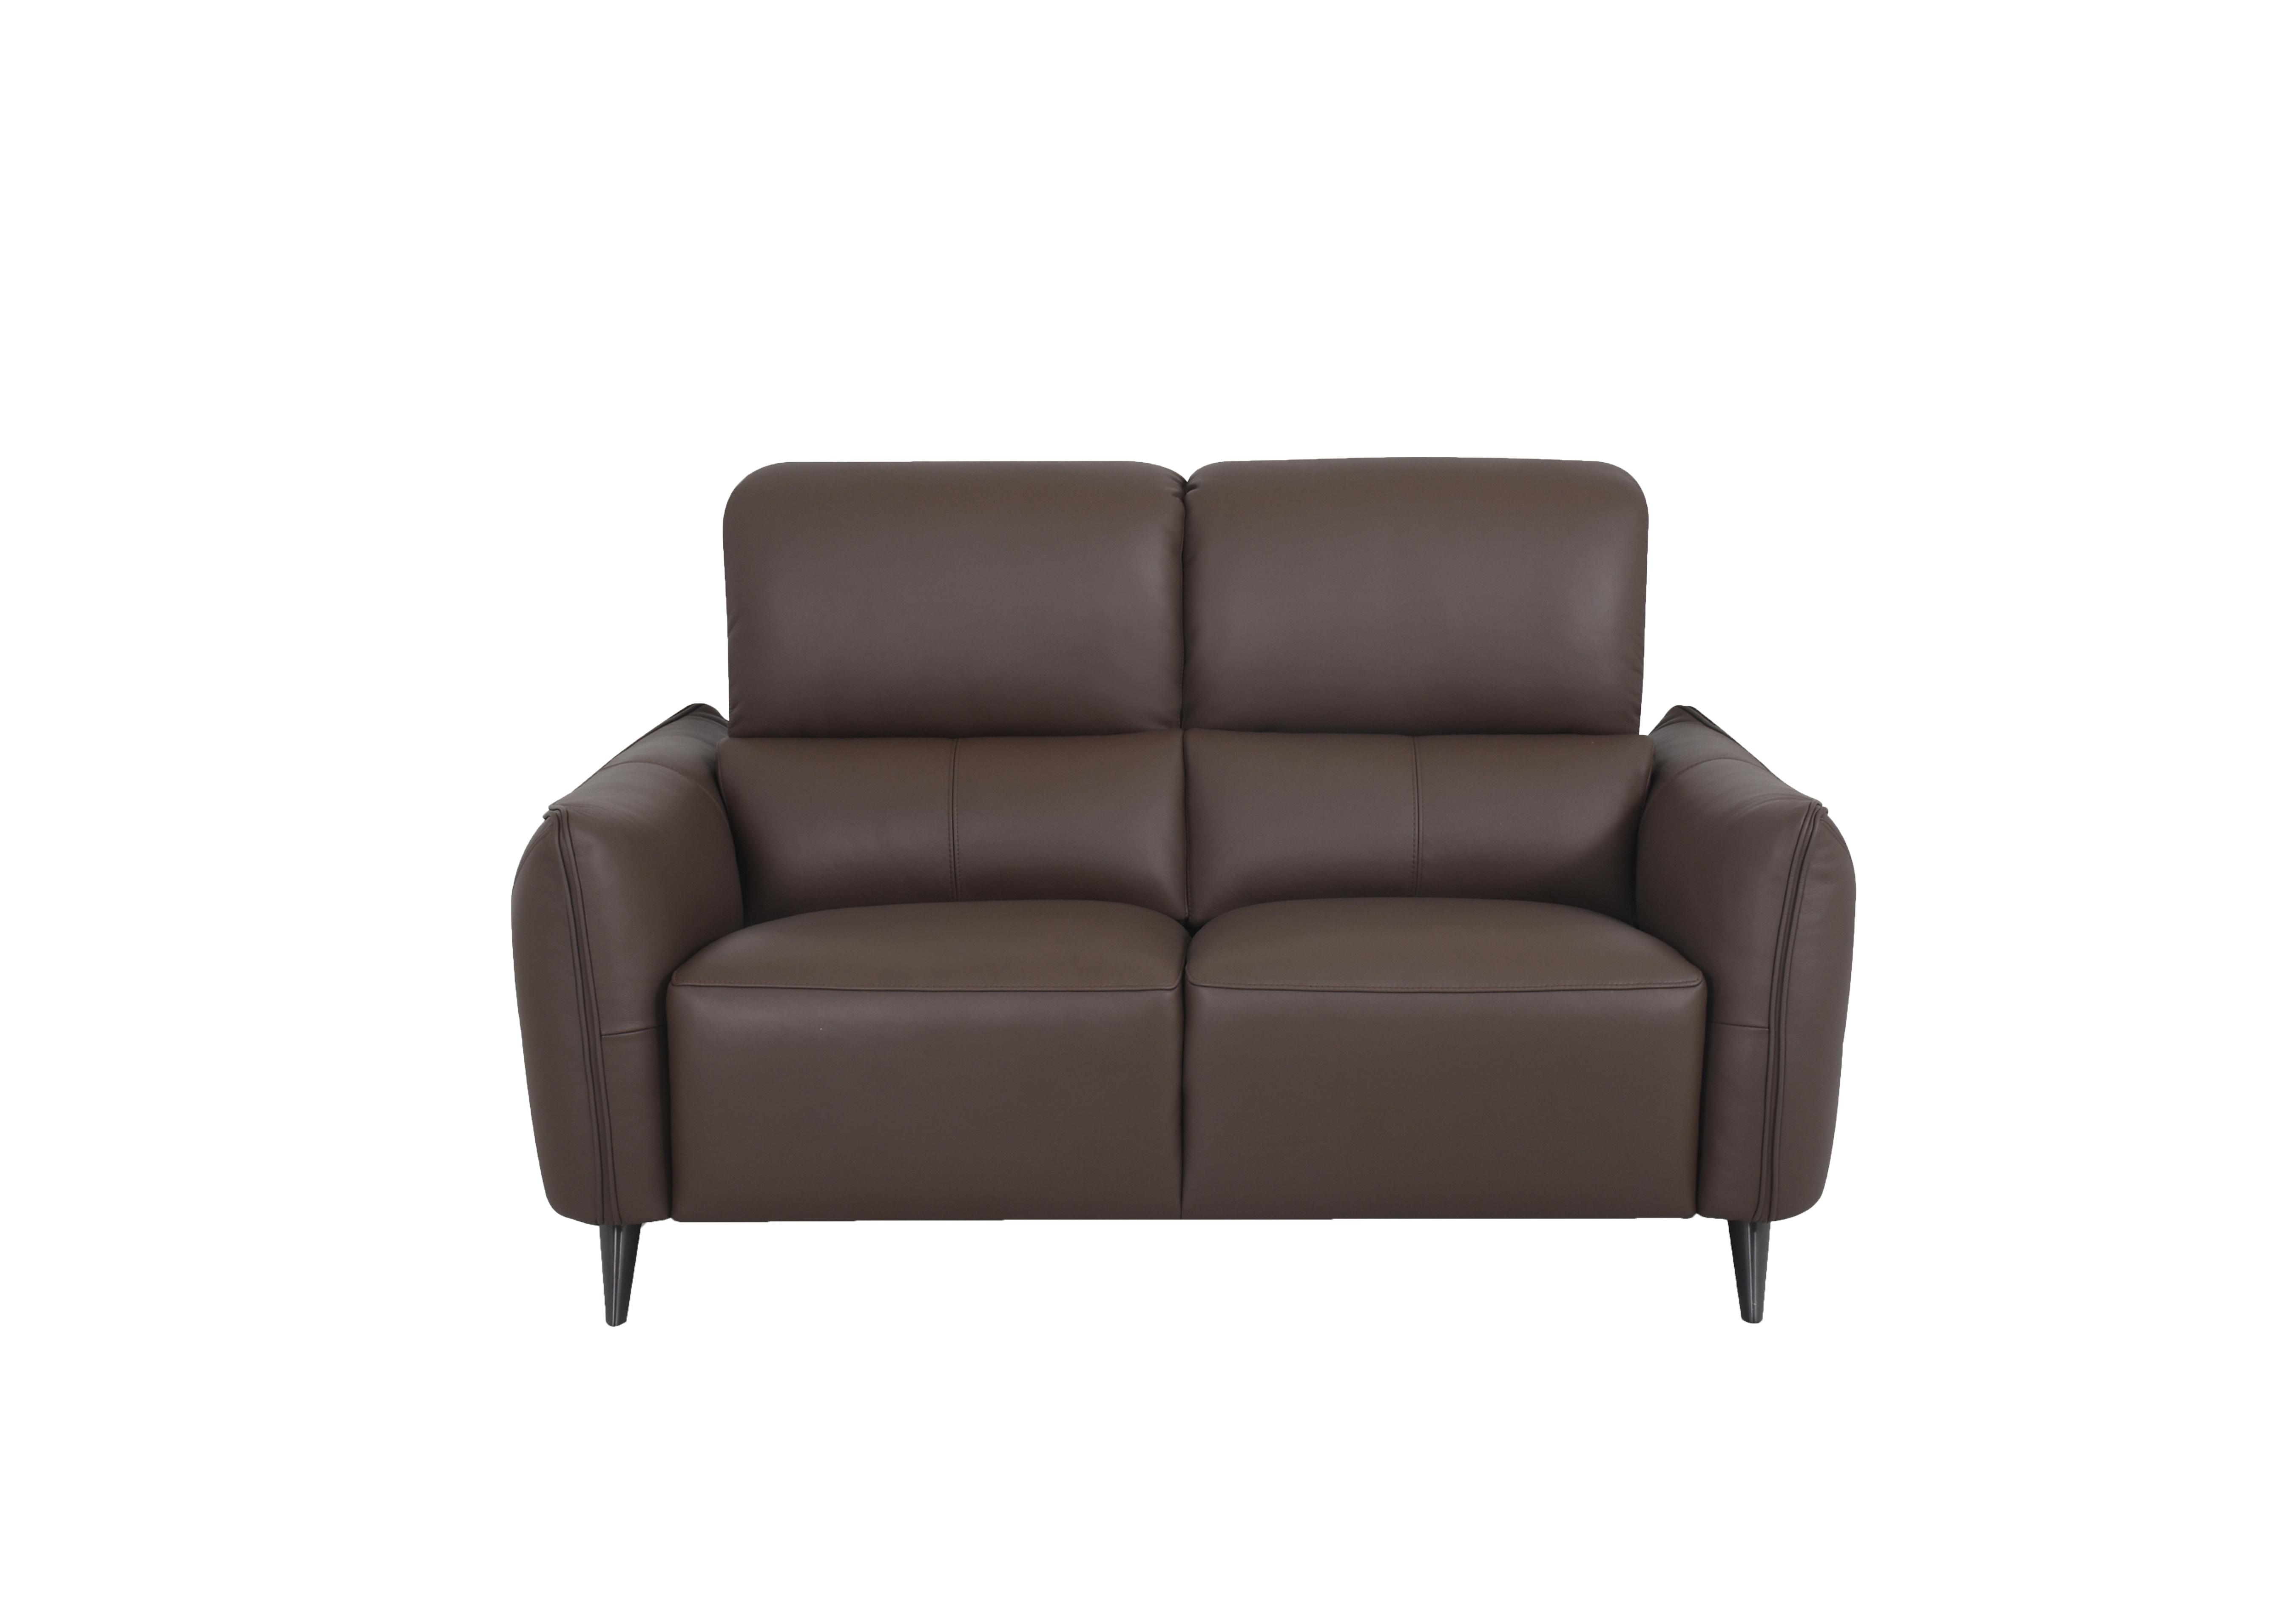 Maddox 2 Seater Leather Sofa in Nn-512e Cacao Brown on Furniture Village